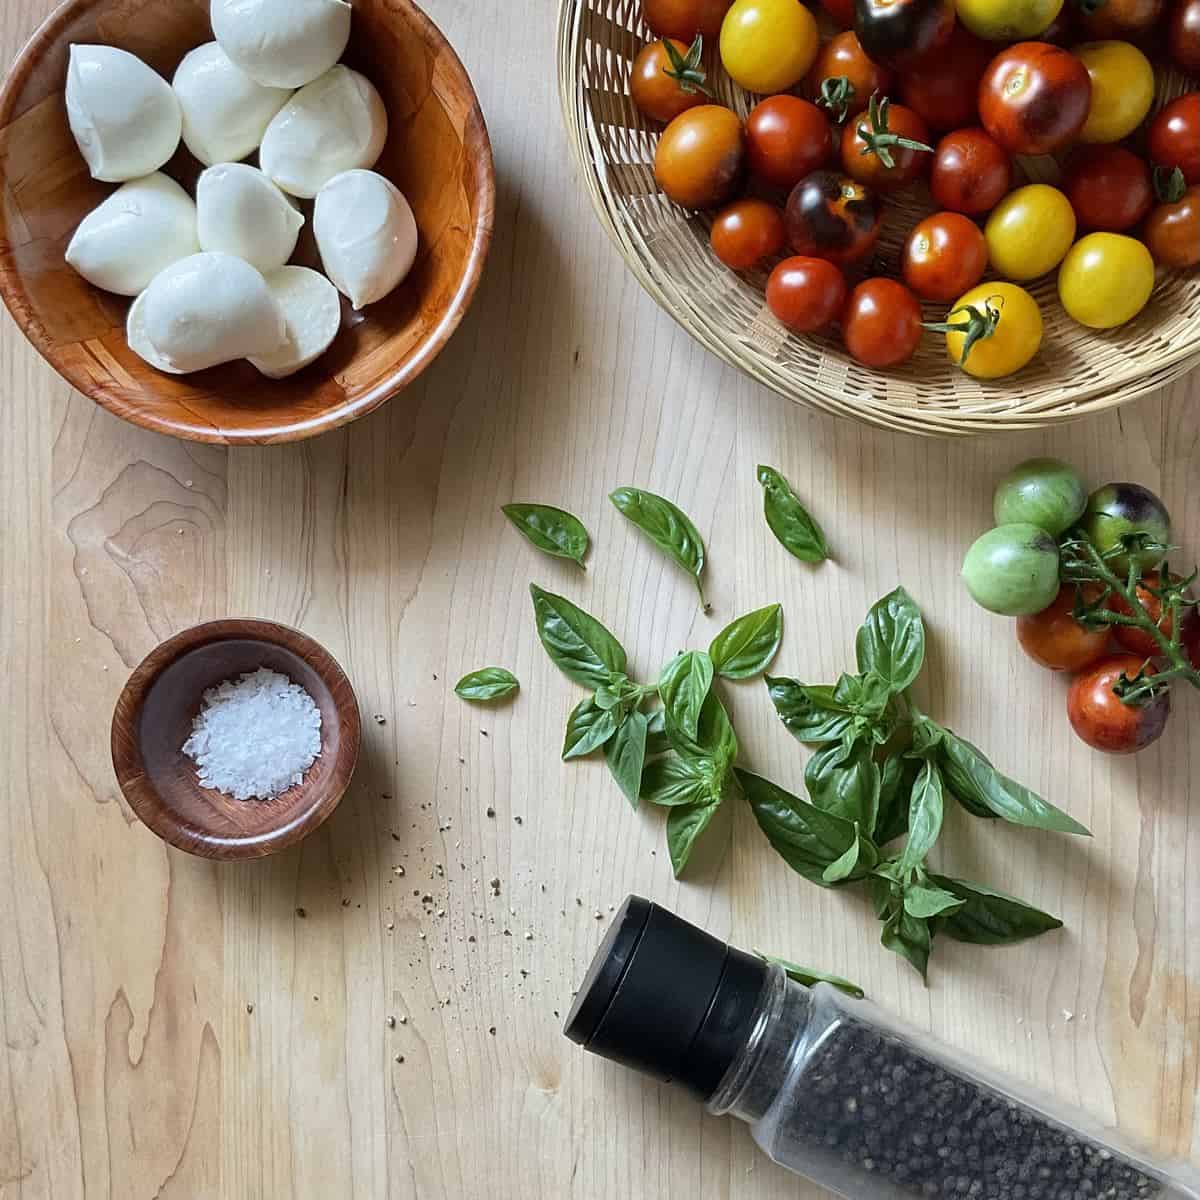 Ingredients needed to make a caprese salad.